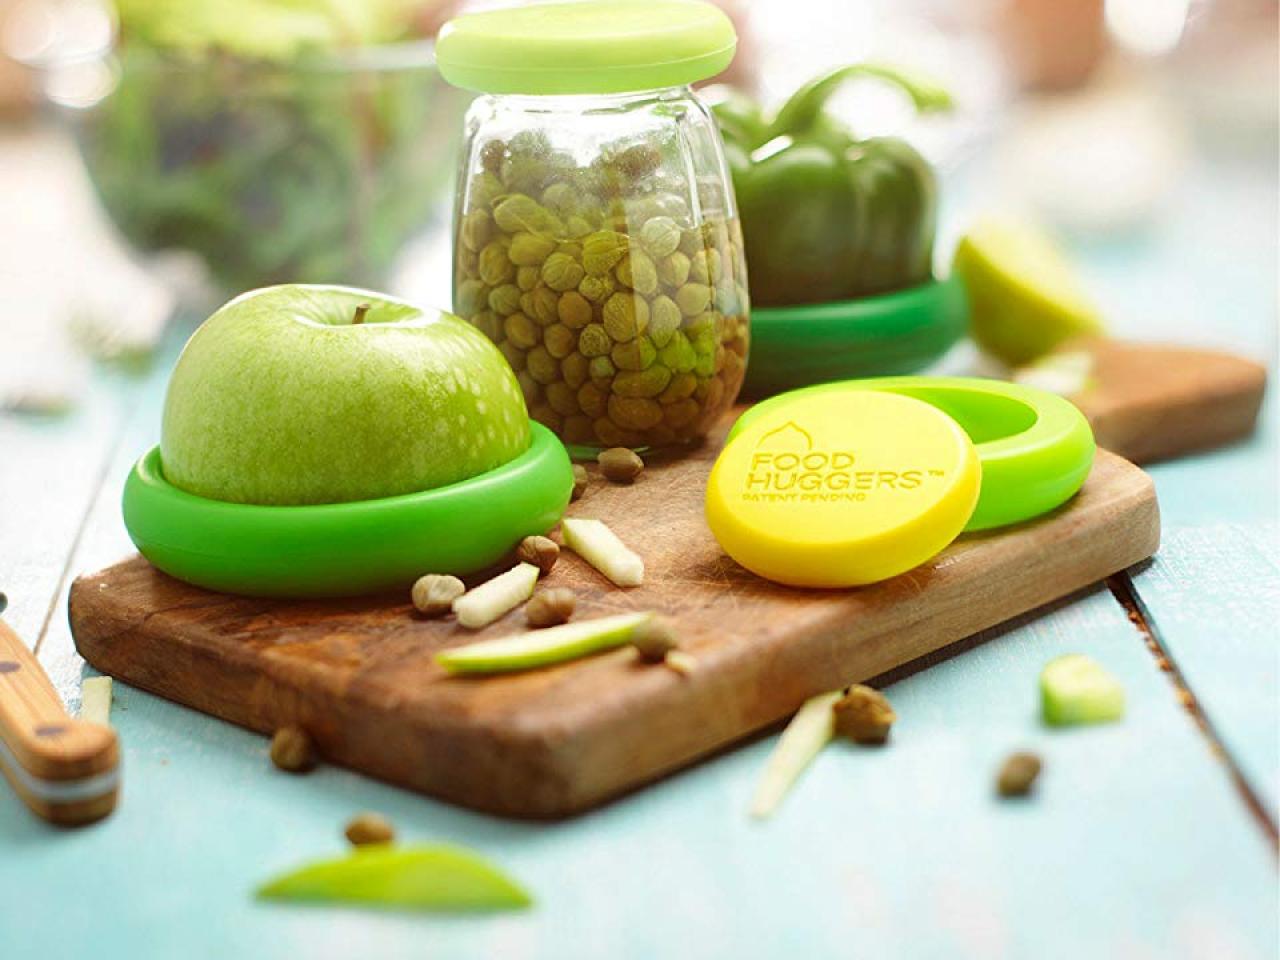 Reusable Food Containers - Hello Green